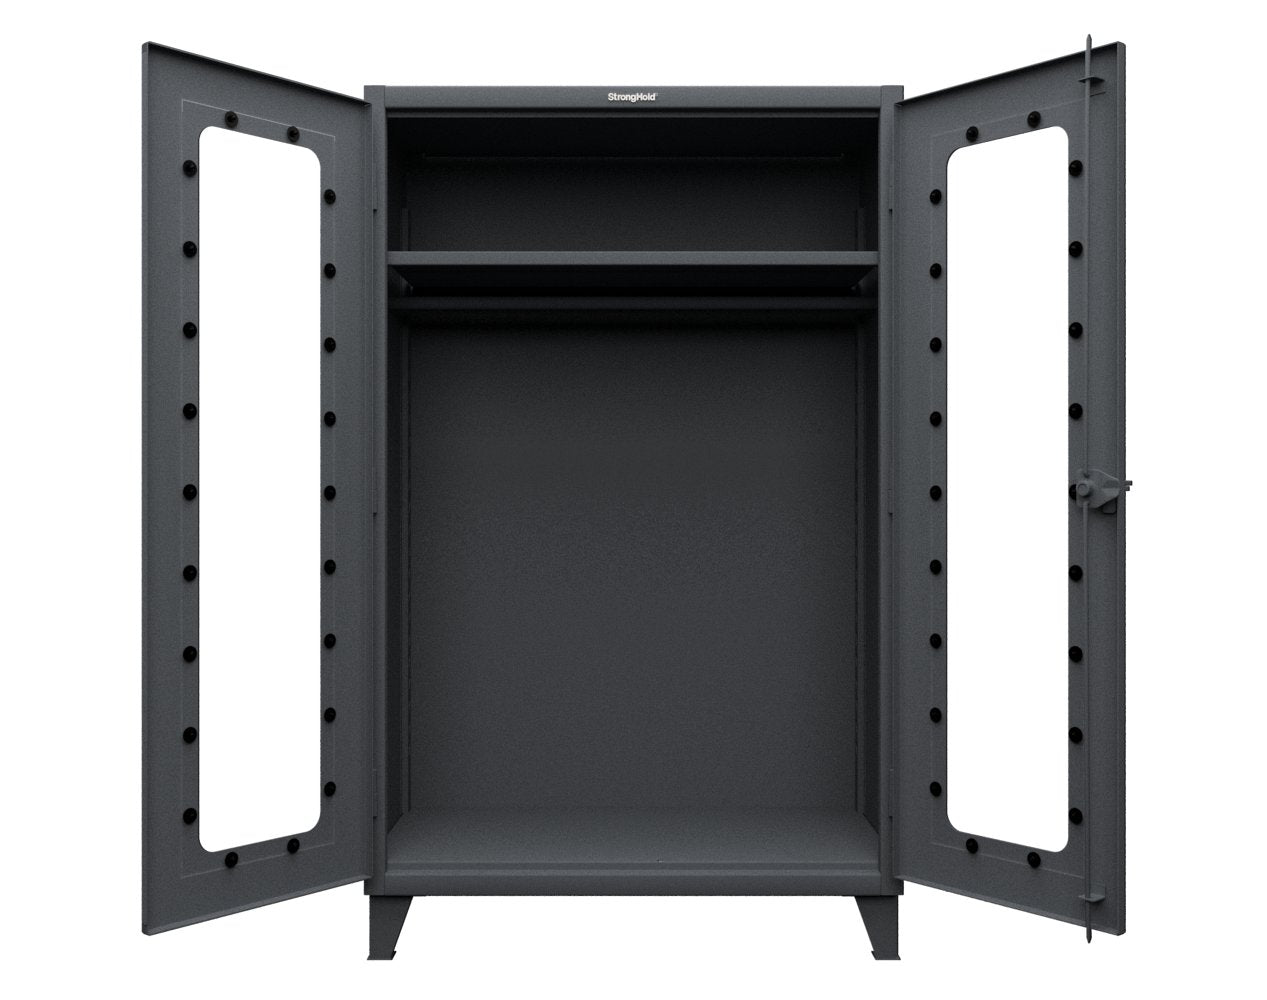 Extreme Duty 12 GA Clear View Uniform Cabinet with Hanger Rod, 1 Shelf - 48 In. W x 24 In. D x 78 In. H